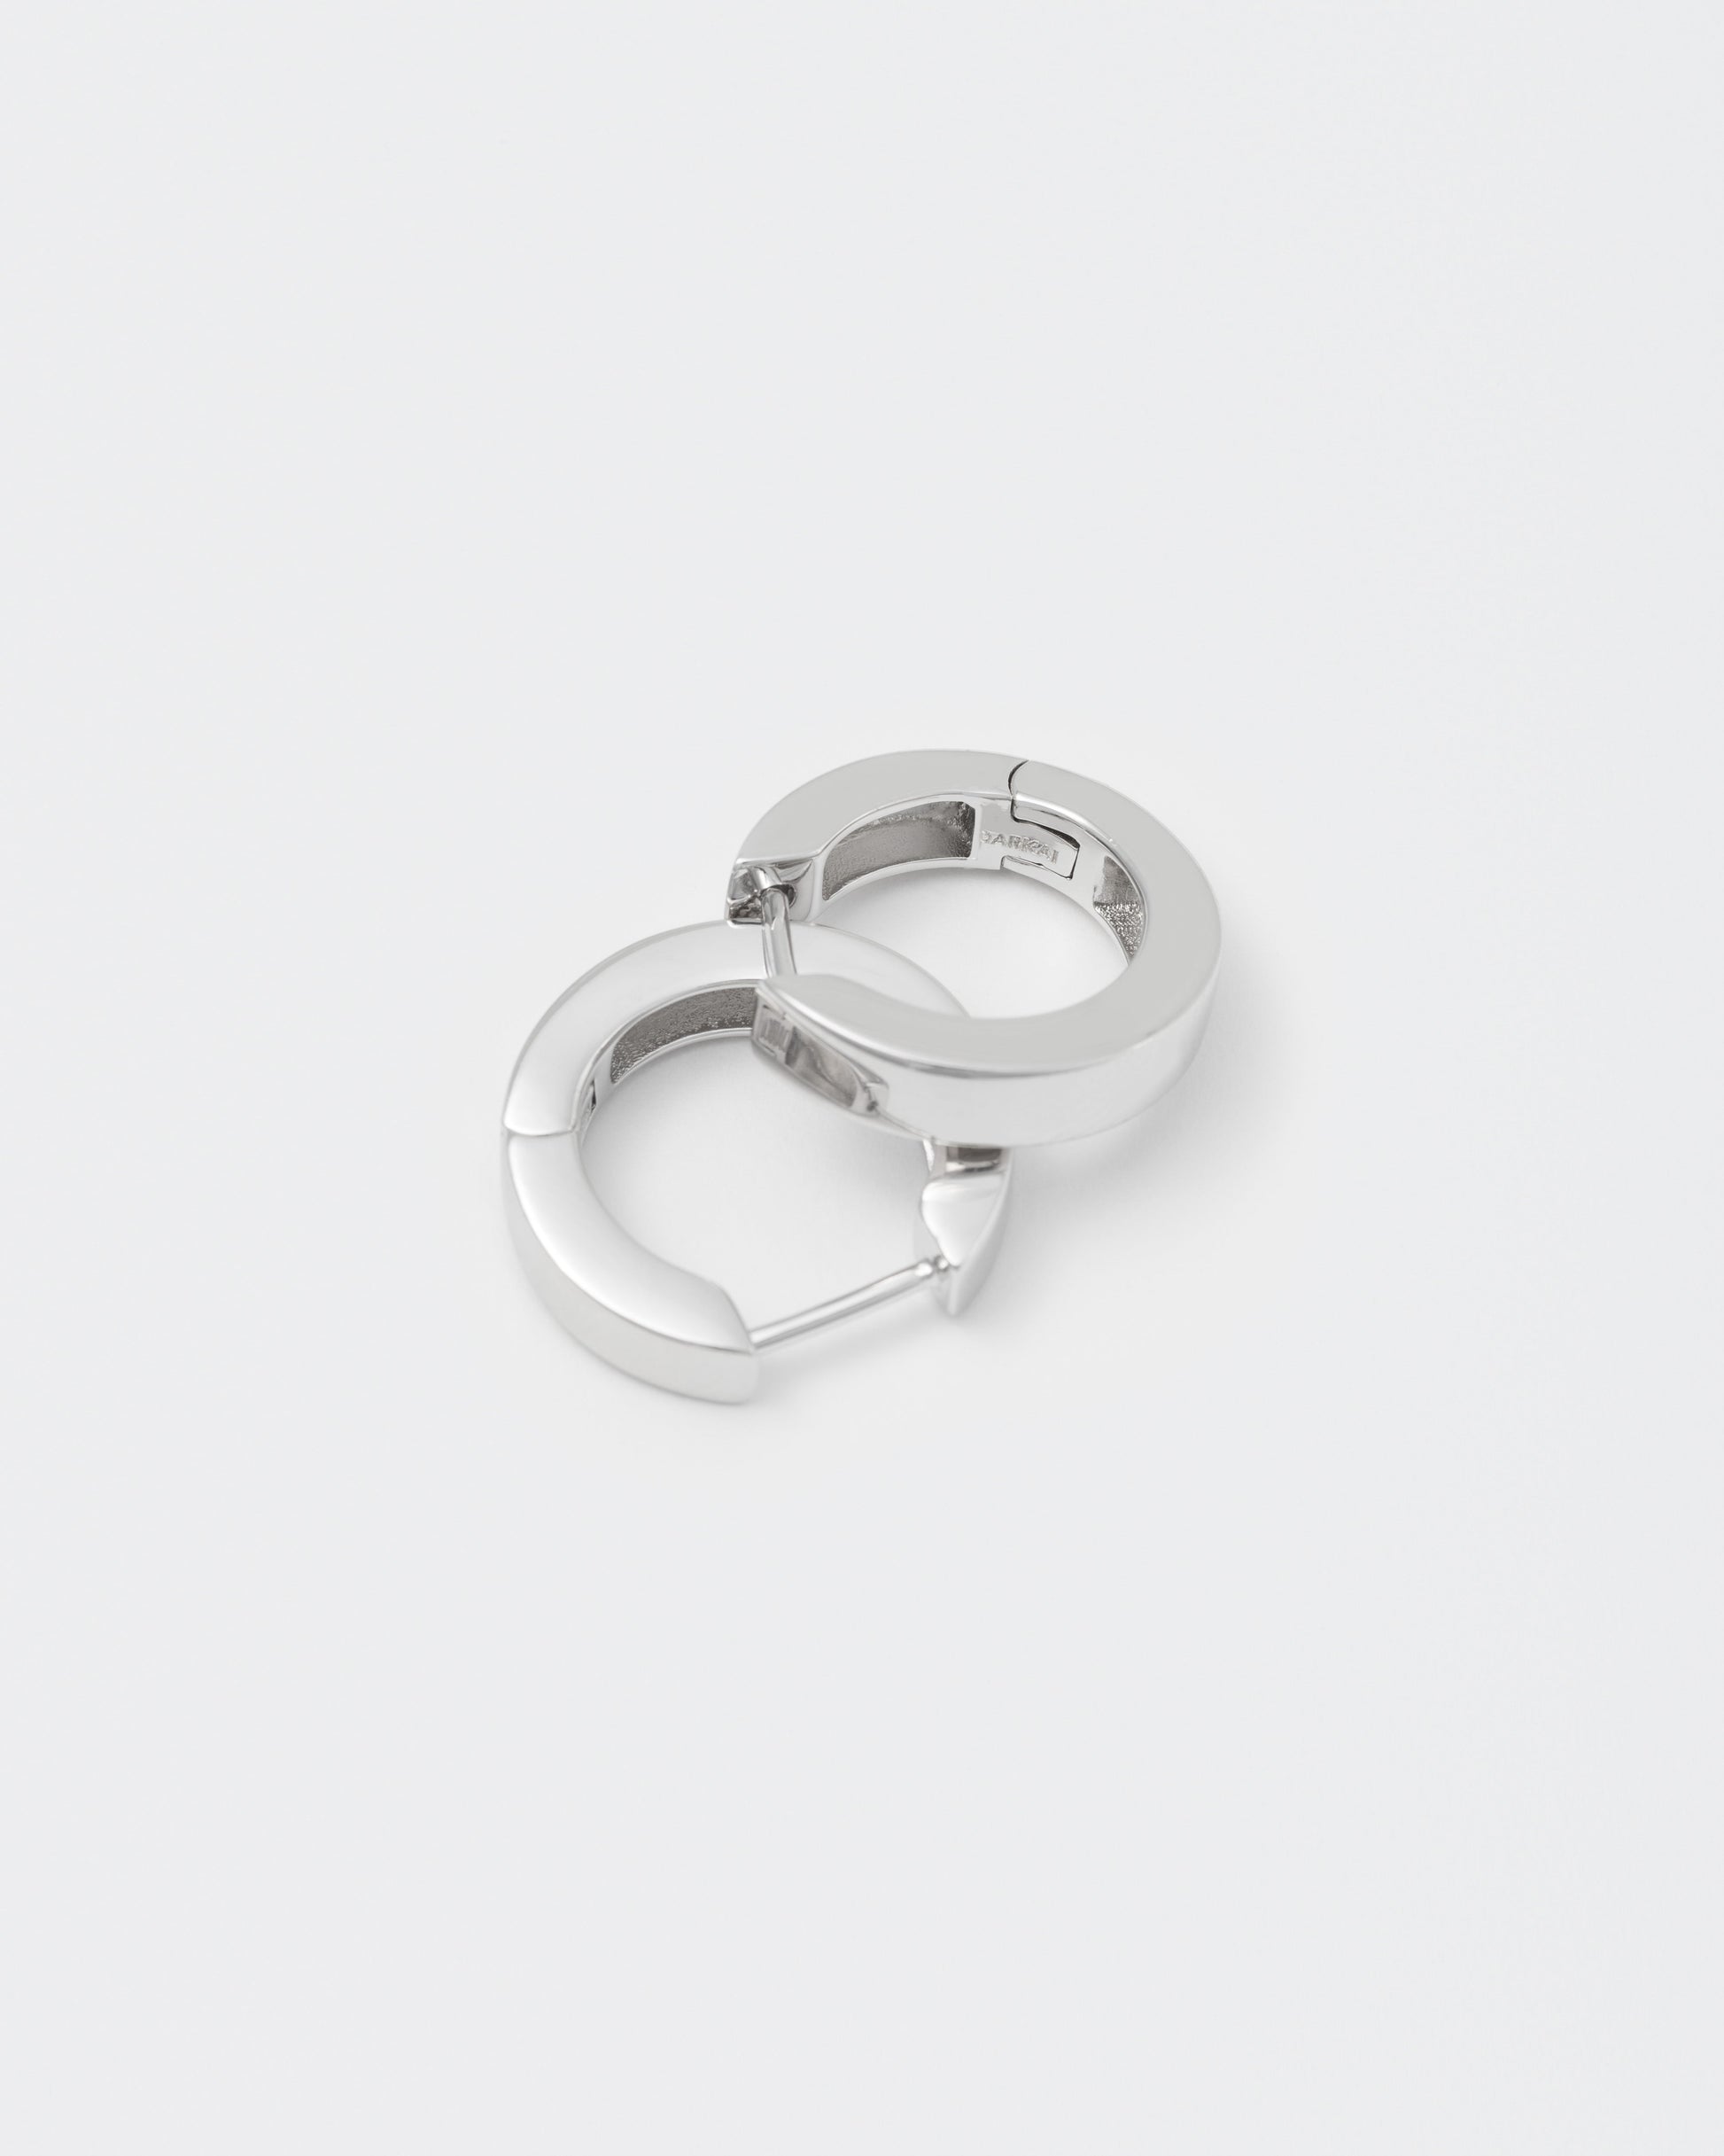 detail of 18k white gold coated hoop earrings with lasered logo and details on the inside